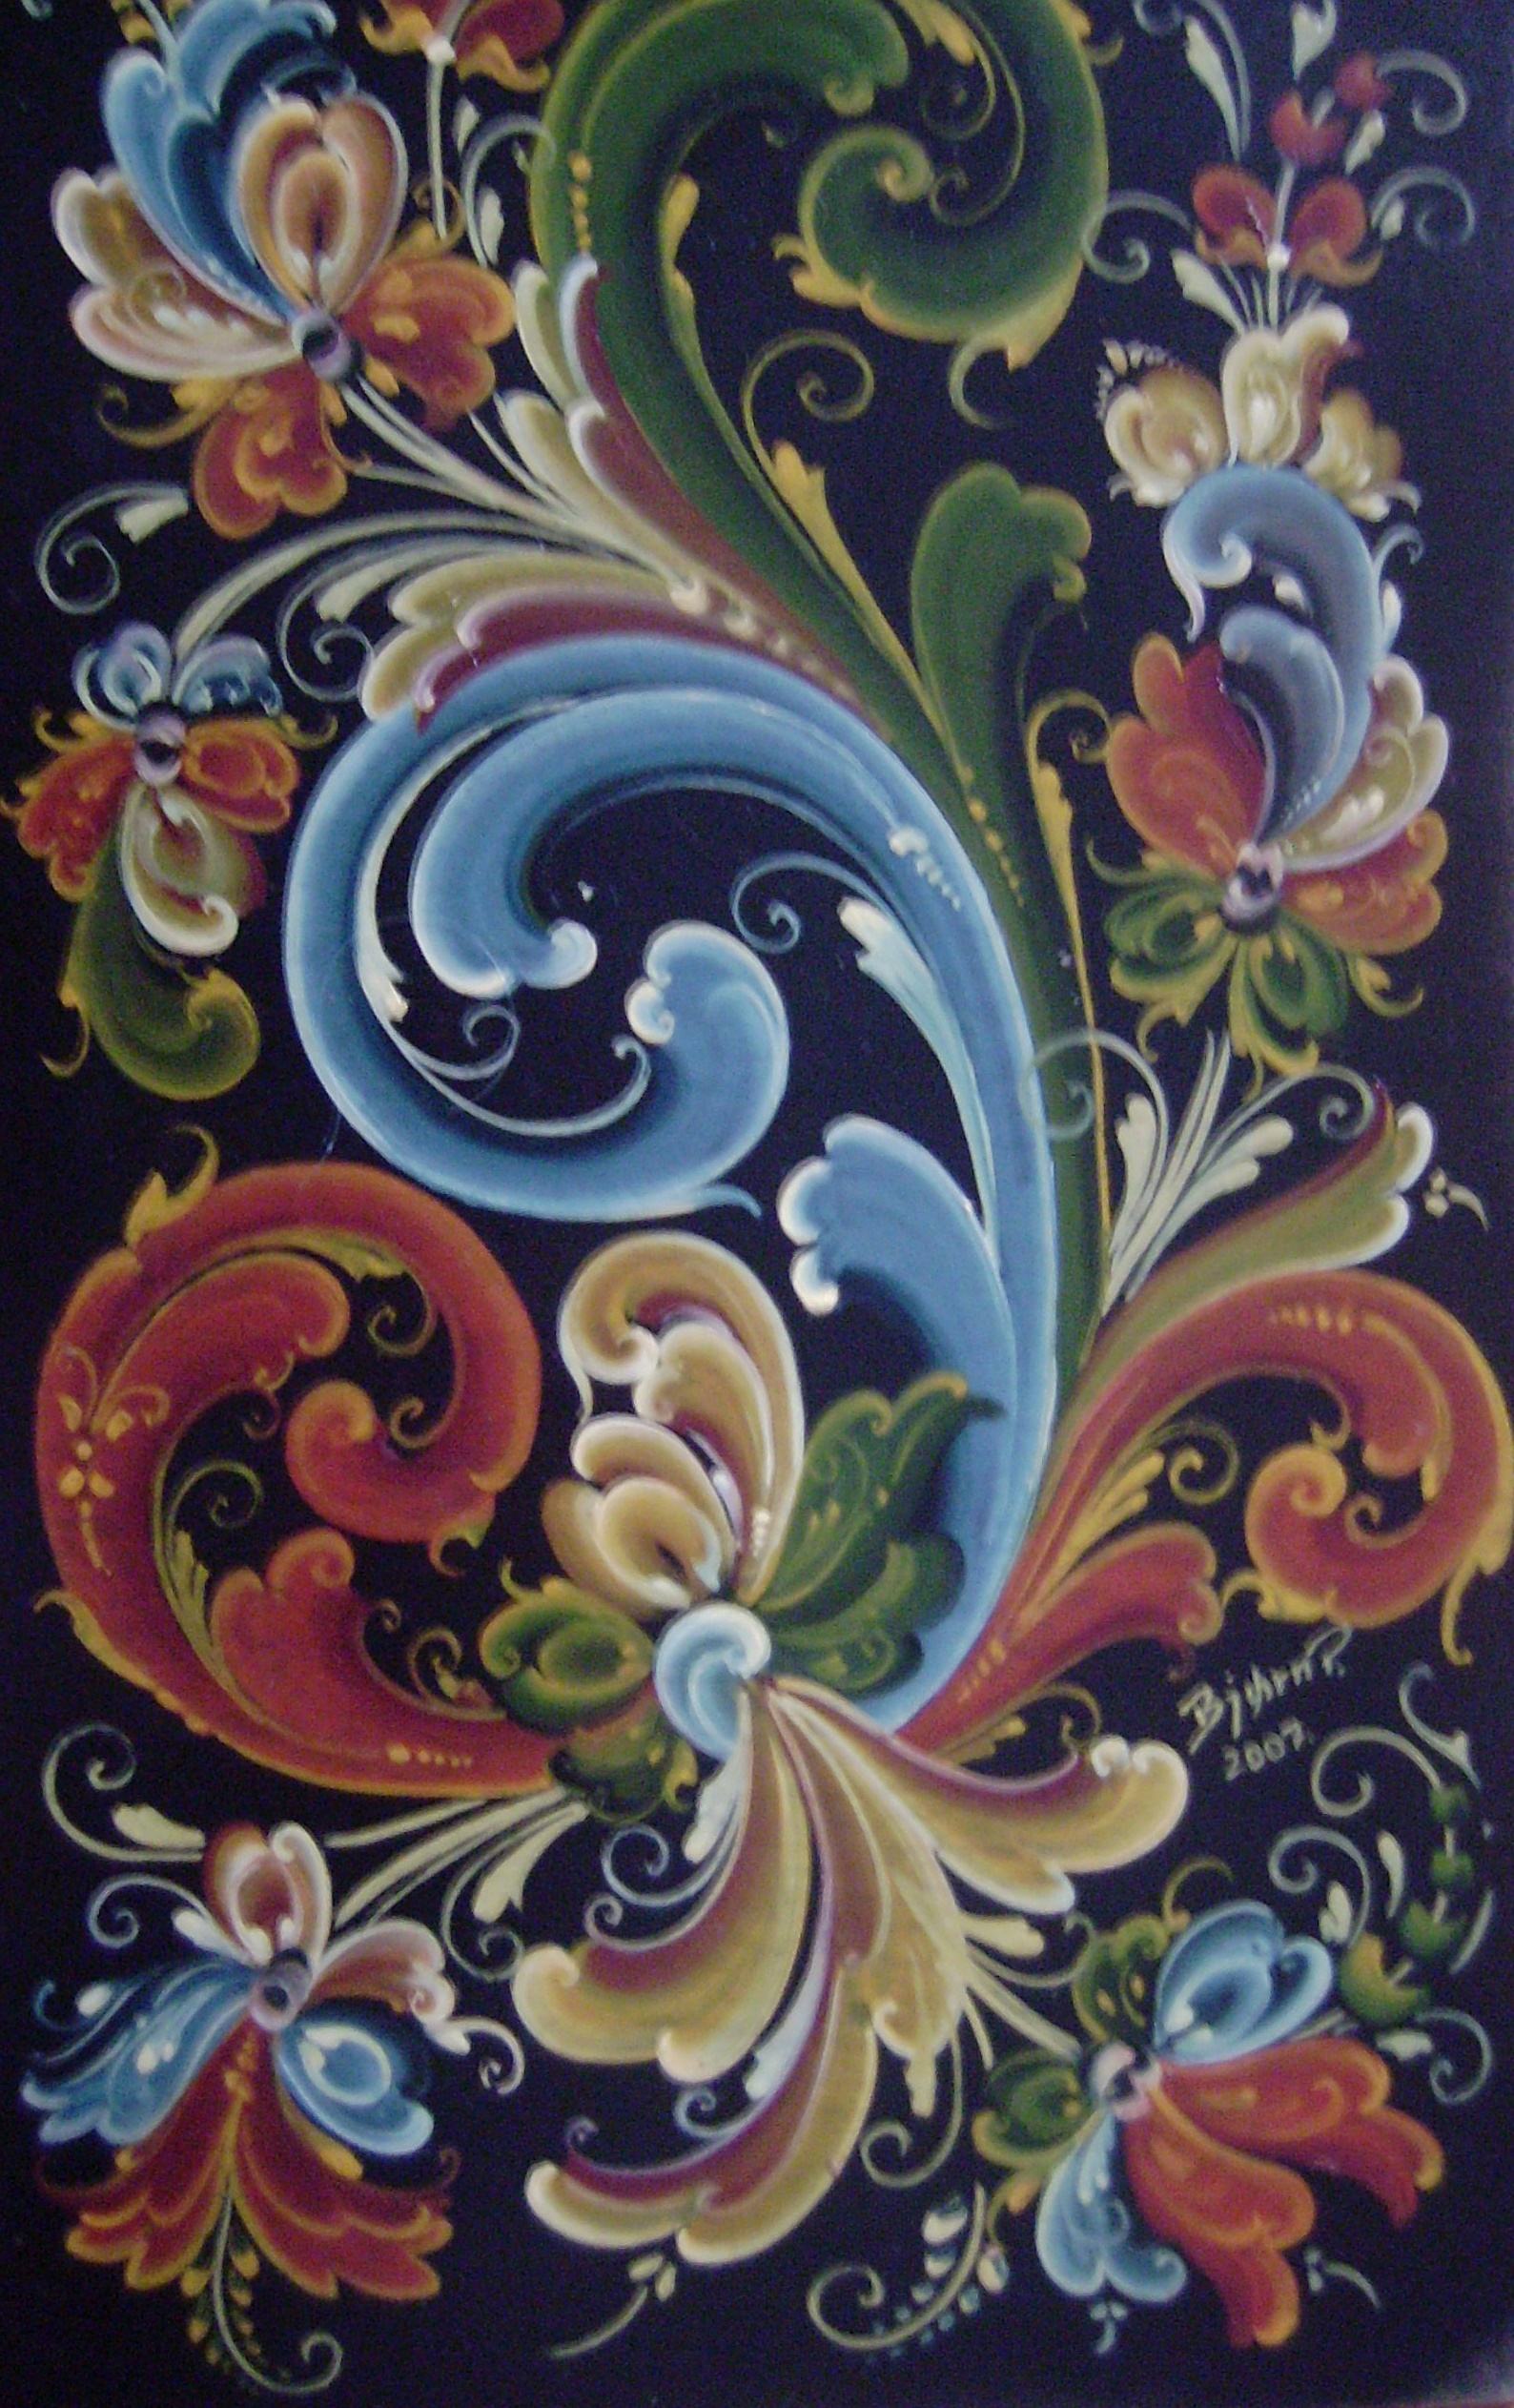 Norwegian Rosemaling from Telemark - image is copyrighted